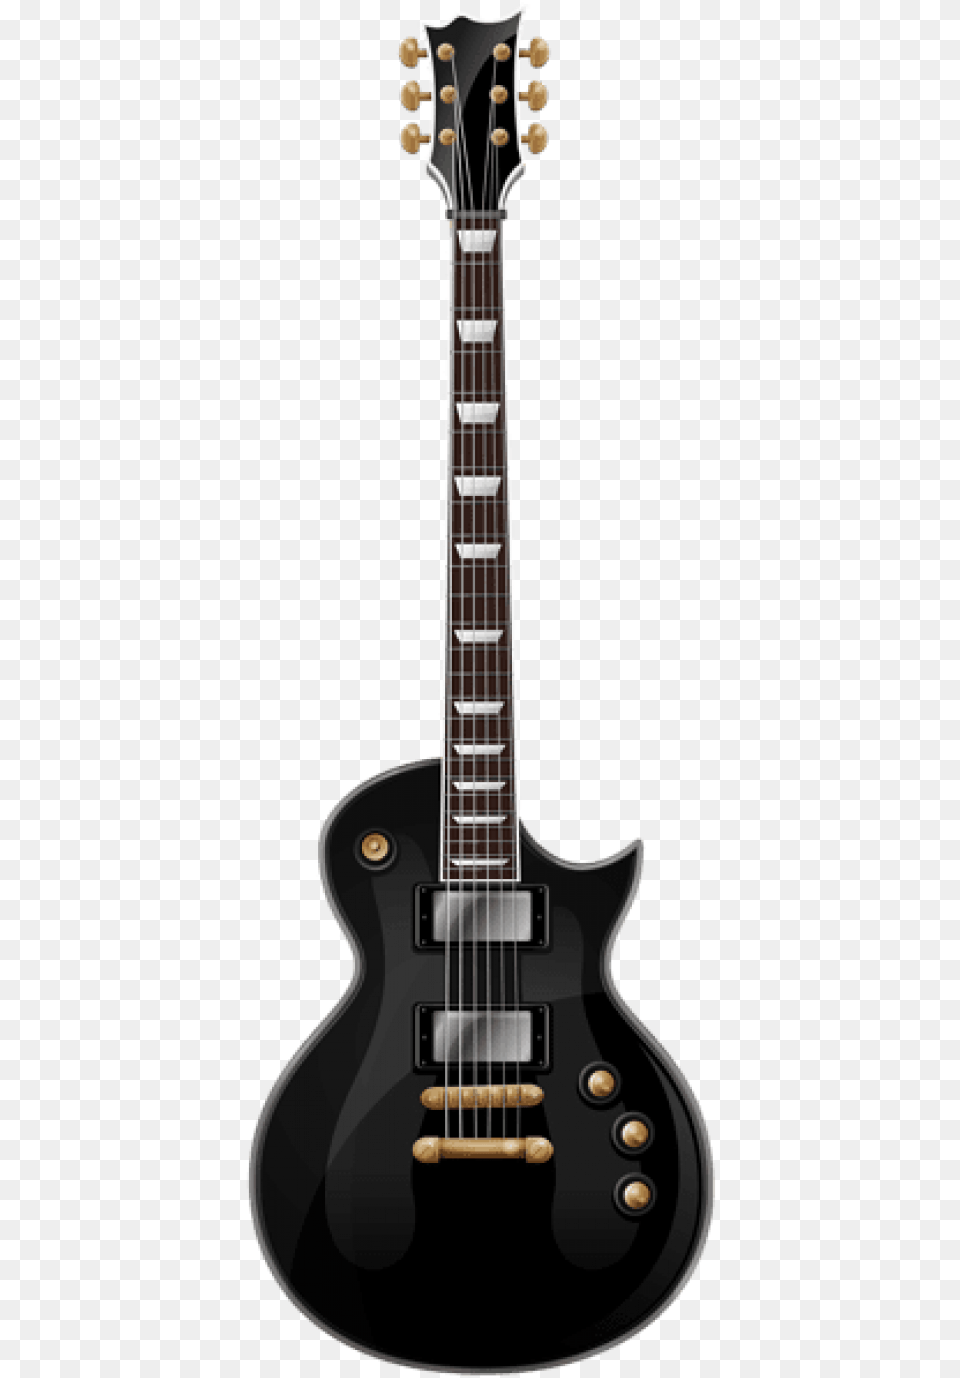 Free Download Black Guitar Images Background Esp Eclipse With Floyd Rose, Musical Instrument, Bass Guitar, Electric Guitar Png Image